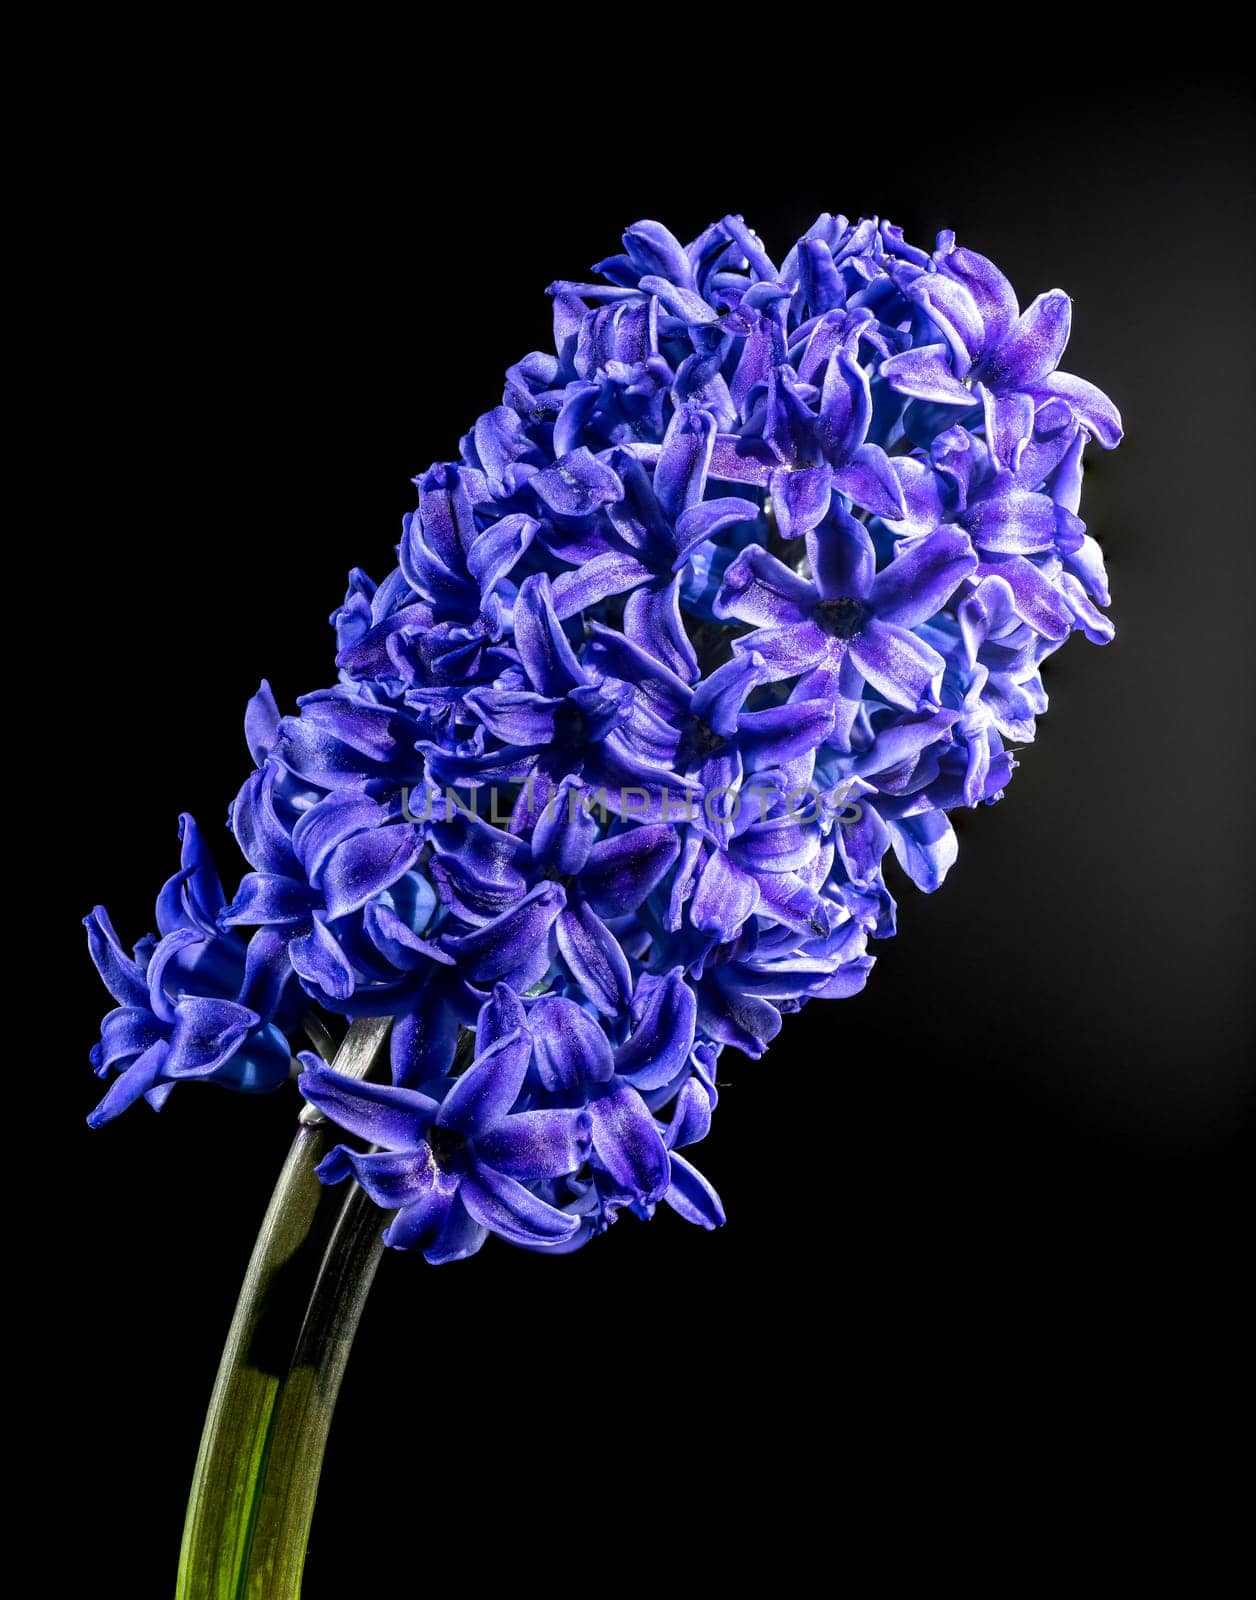 Beautiful blooming Purple Hyacinth flower on a black background. Flower head close-up.